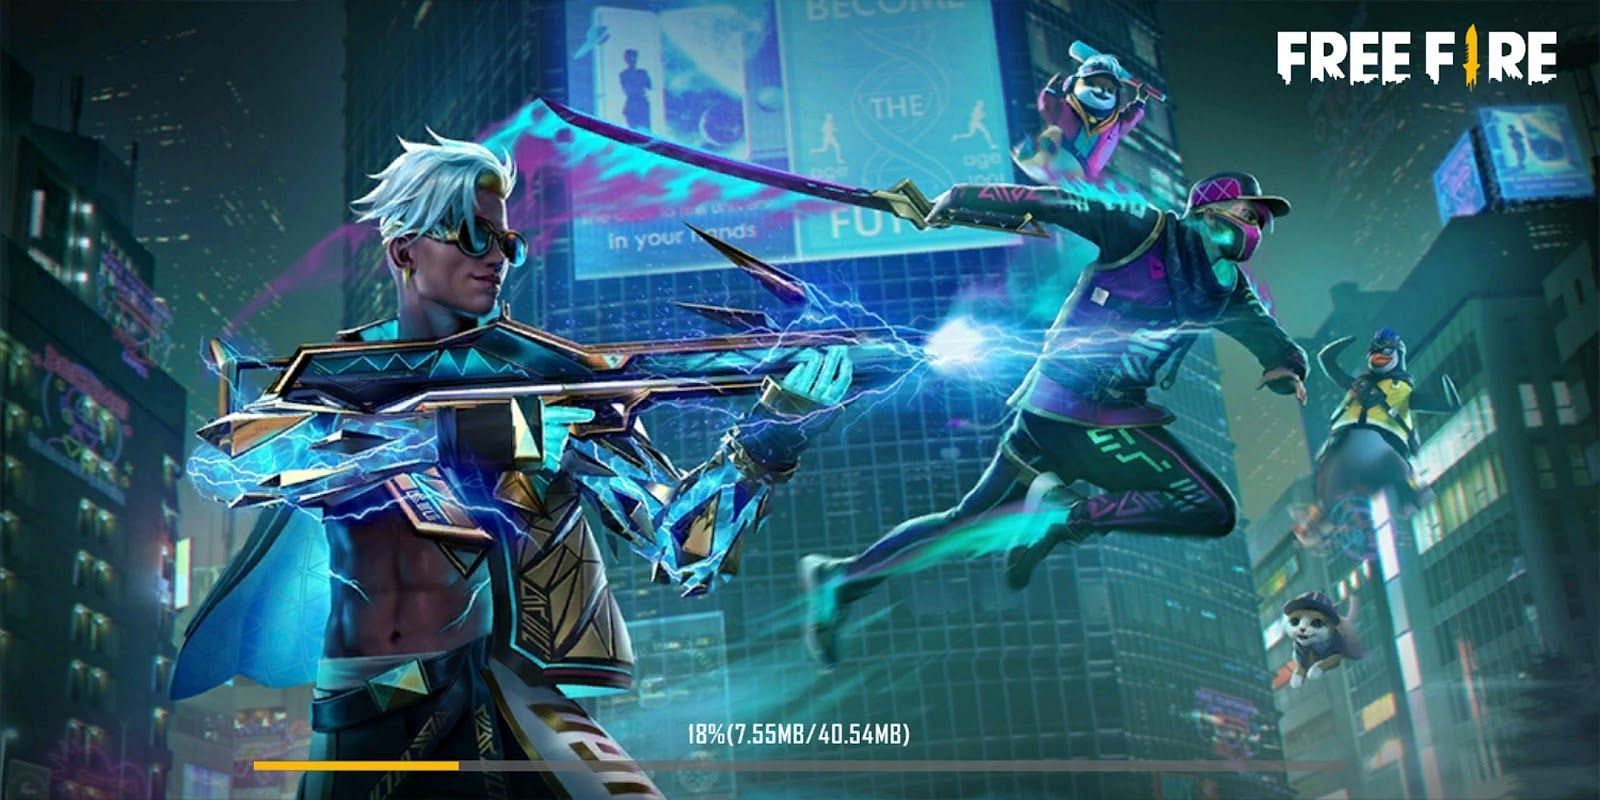 The game will download additional files (Image via Garena)